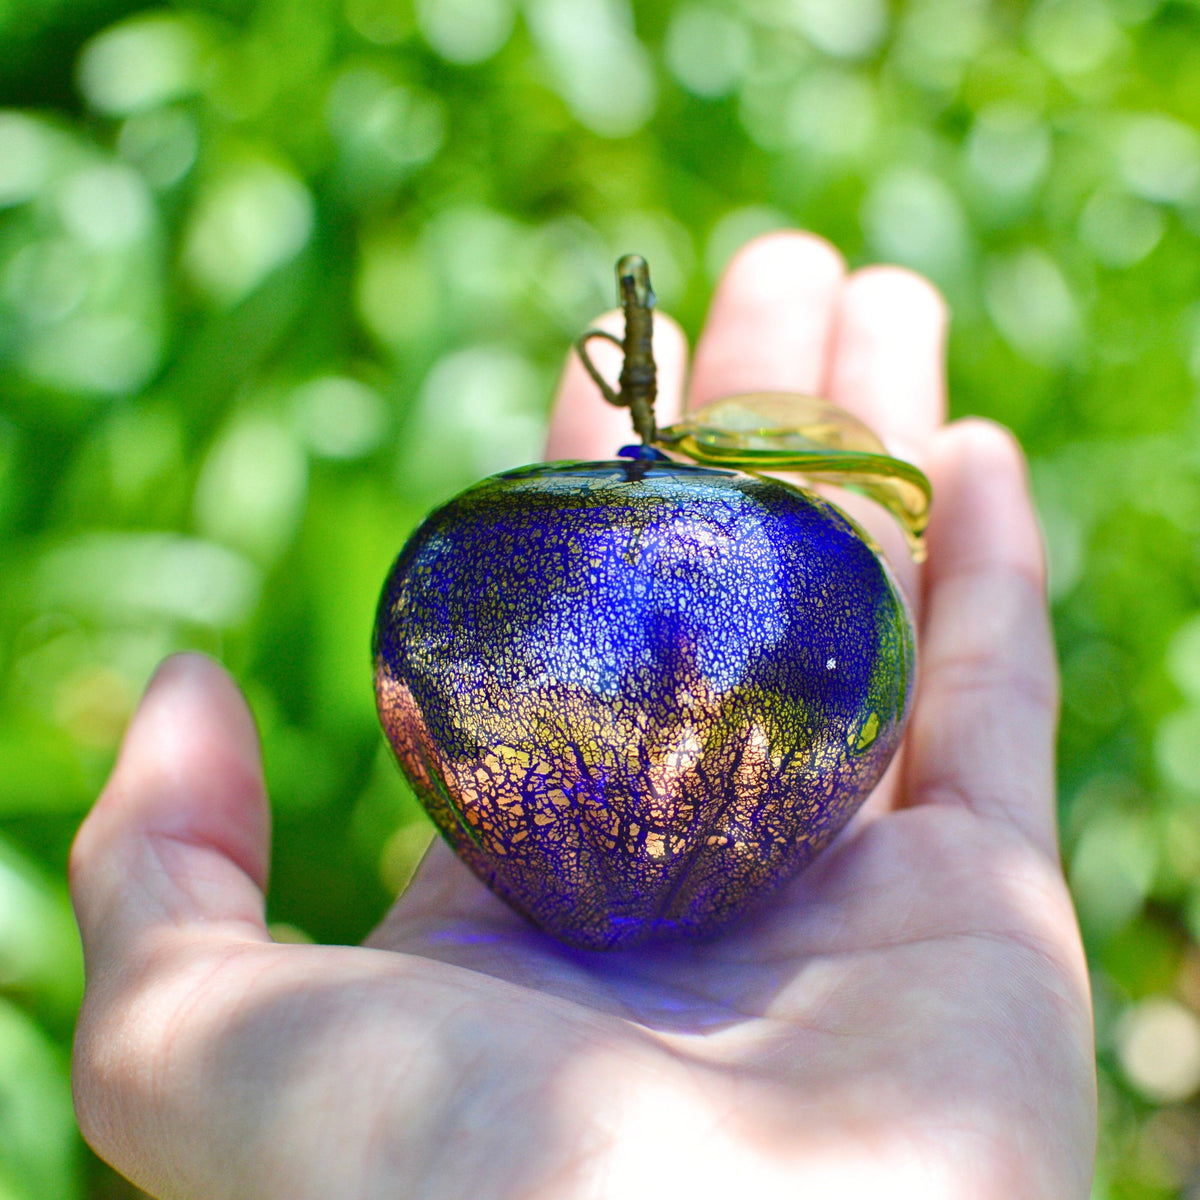 Murano Blown Glass Apple, 24k Gold Foil, Hand Blown in Italy